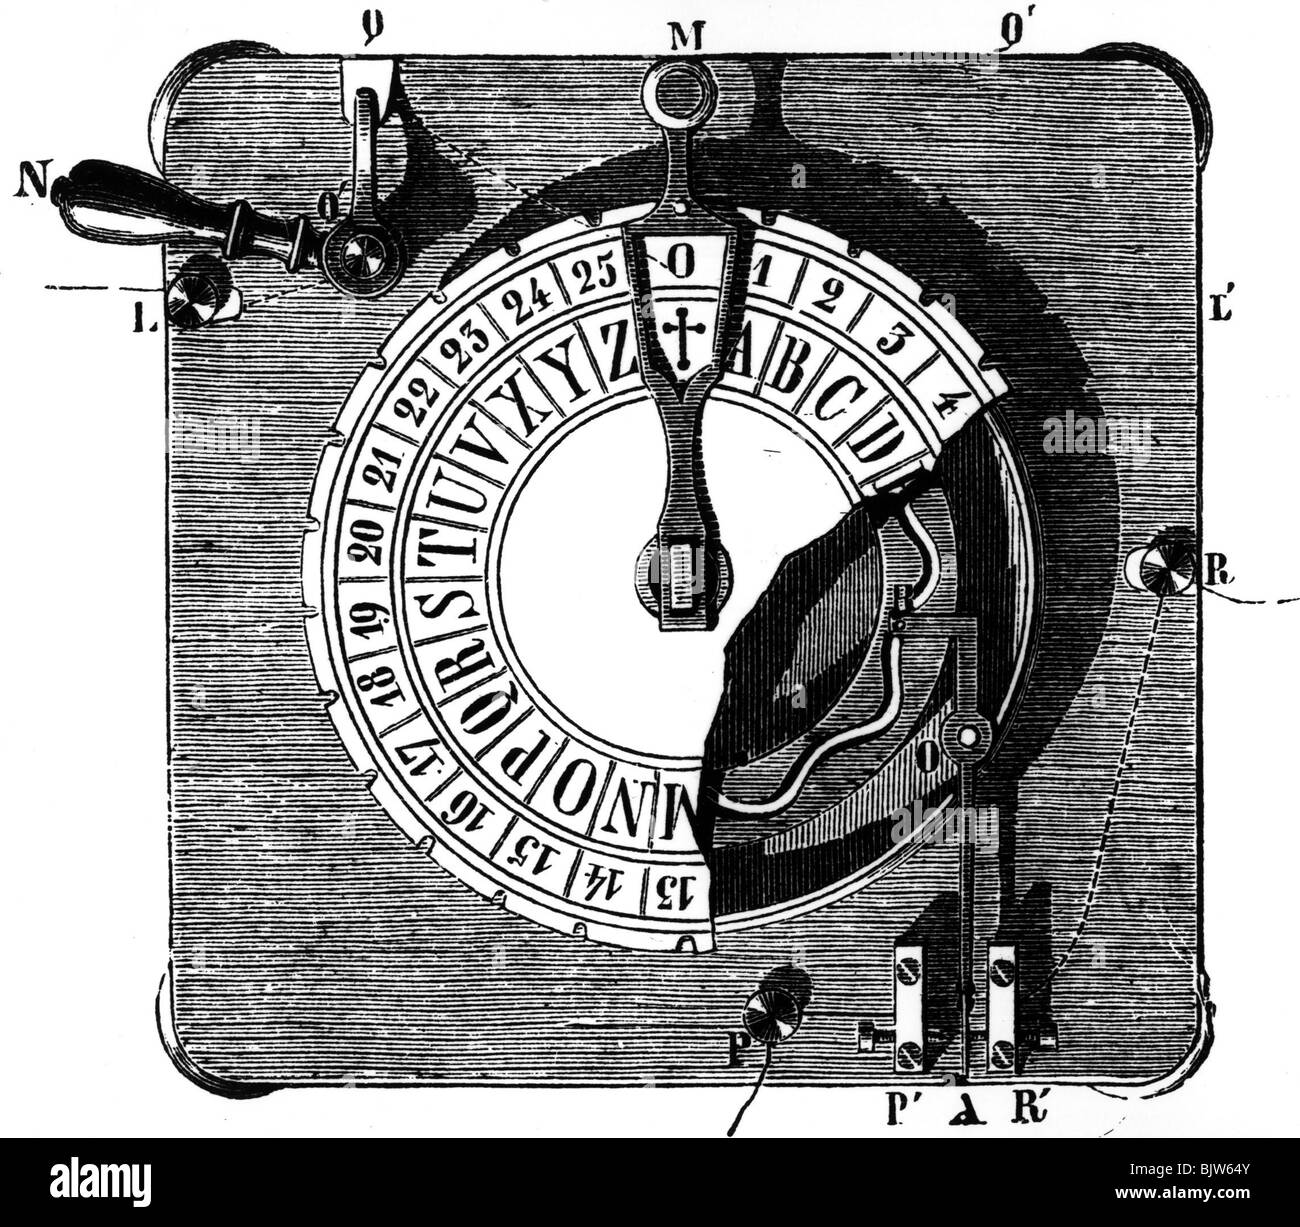 mail, telegraphy, needle telegraph of Louis Francois Clement Breguet, 1842, Stock Photo